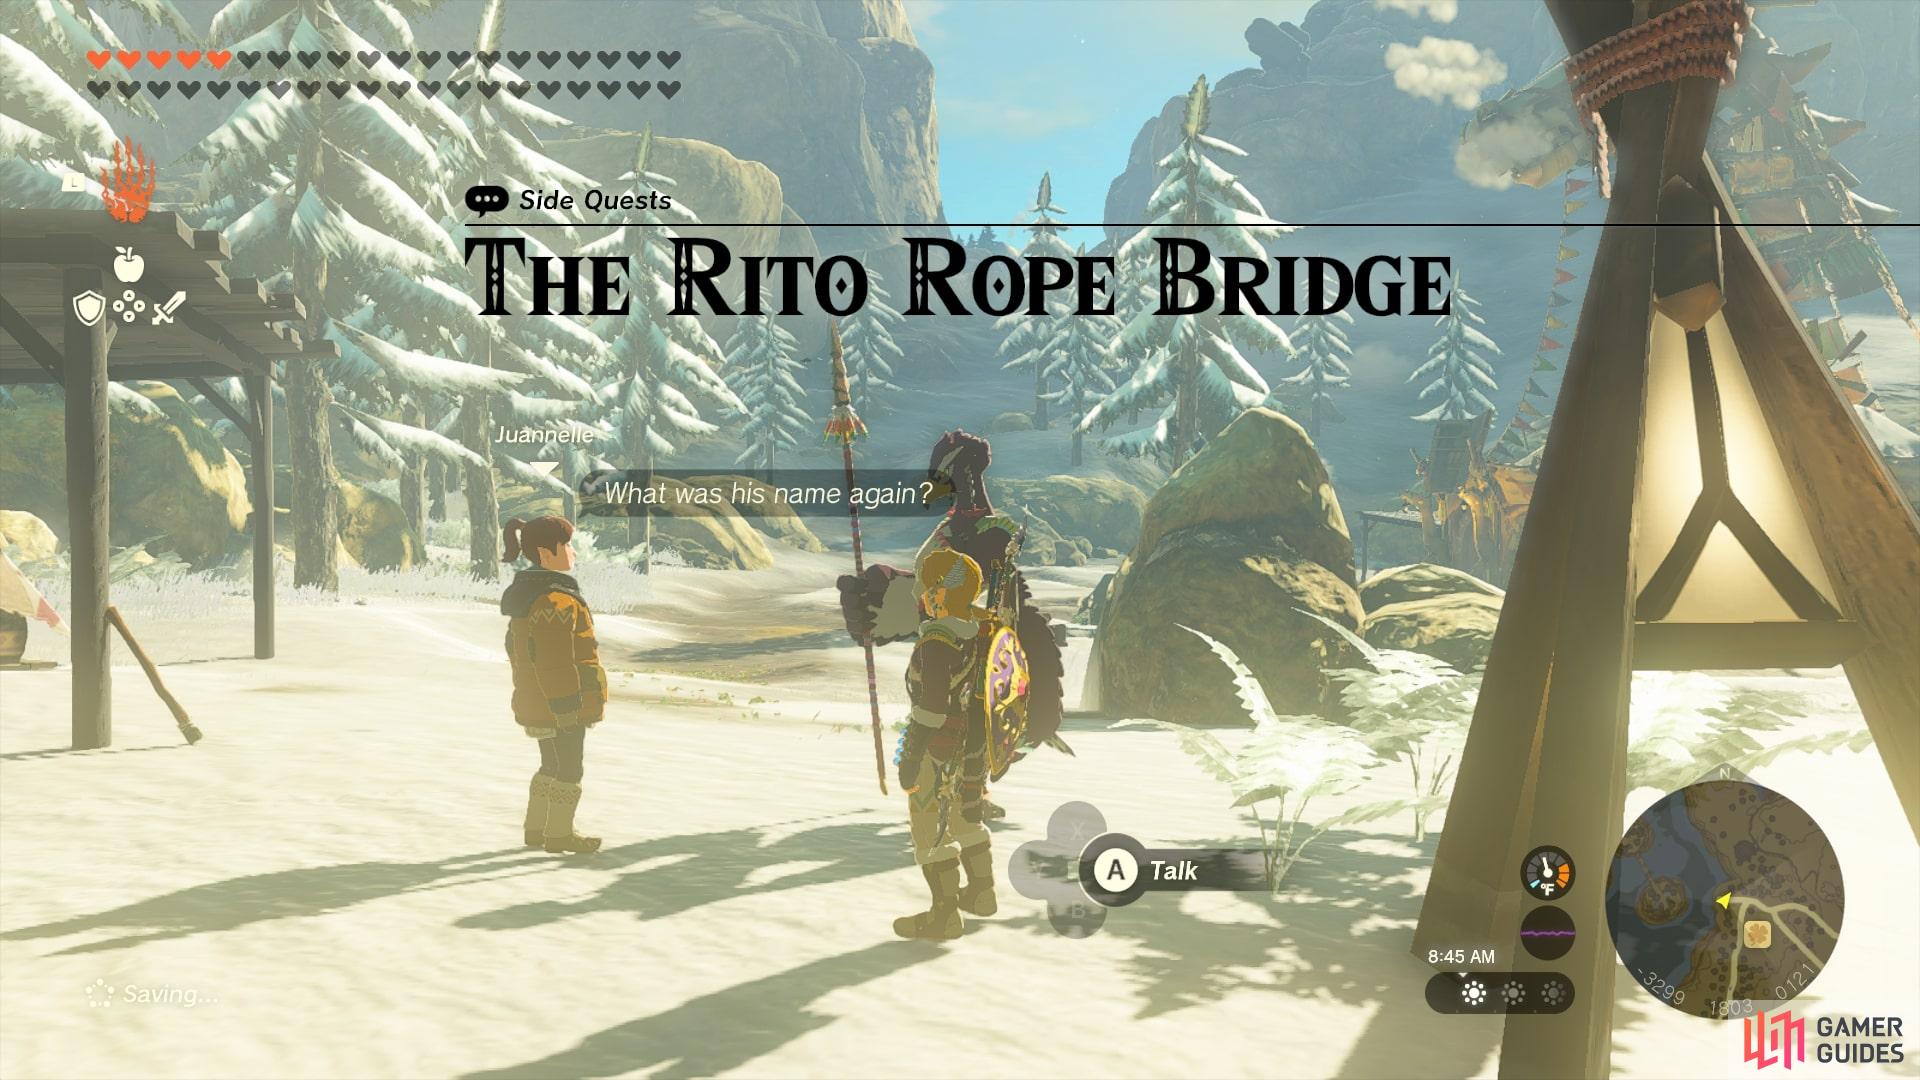 Speak with Juannelle and Gesane to start The Rito Rope Bridge.